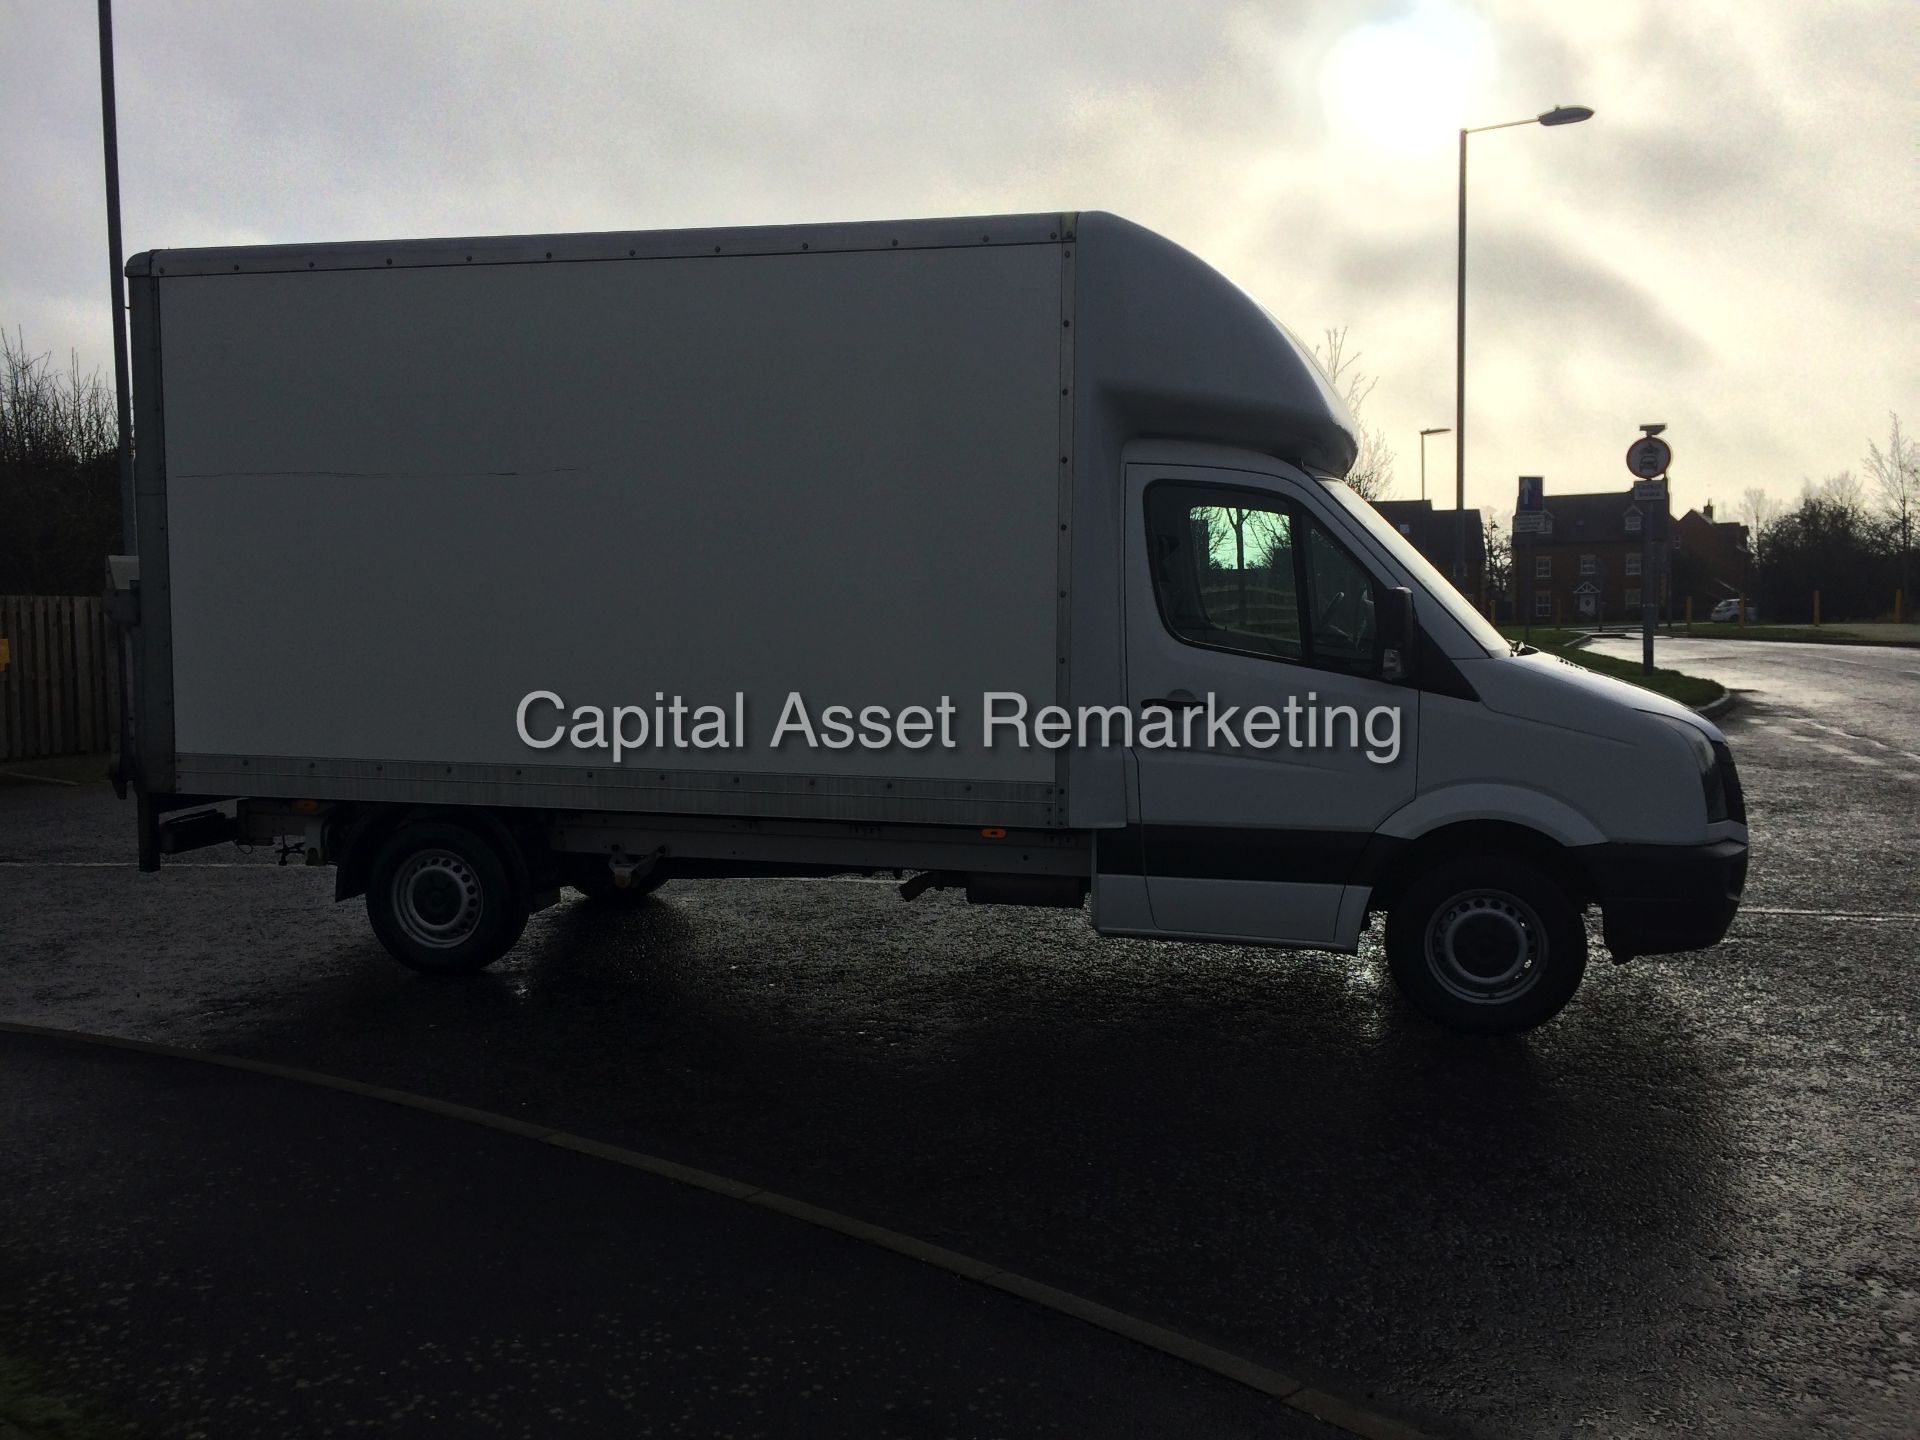 VOLKSWAGEN CRAFTER CR35 2.0TDI (109) BHP - LWB LUTON WITH ELECTRIC TAILIFT - 2014 MODEL - 1 OWNER - Image 4 of 20